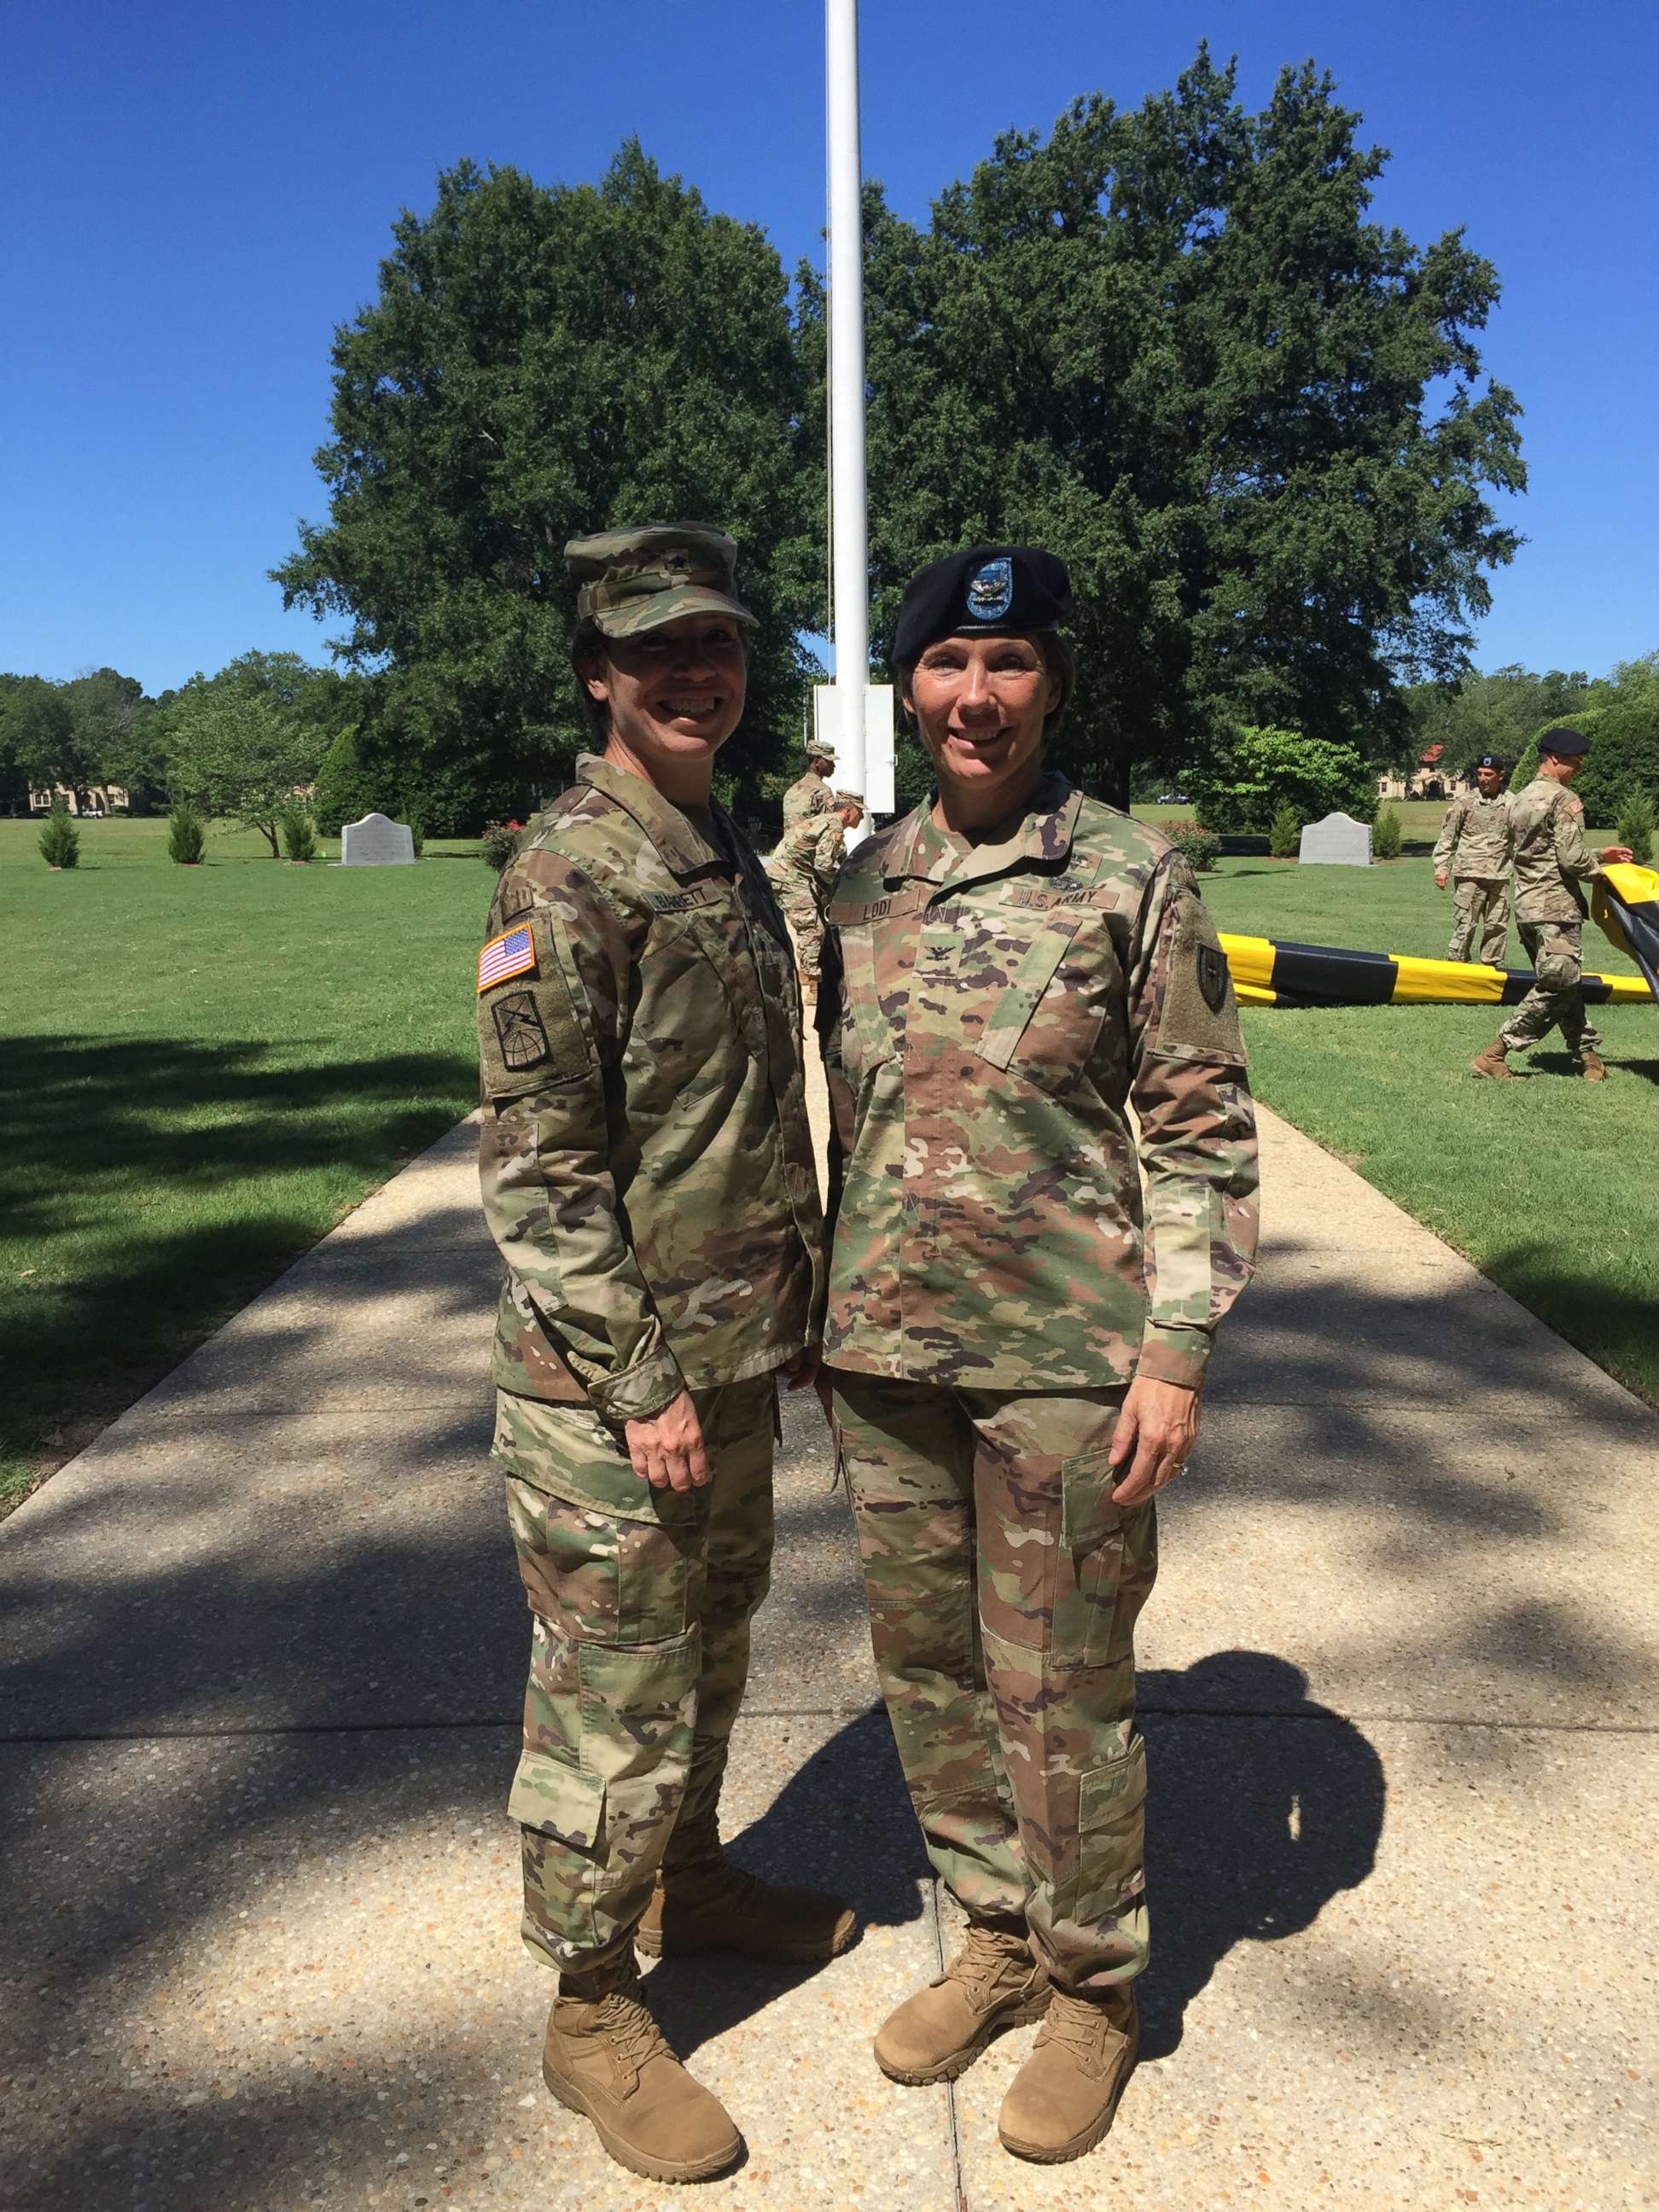 PHOTO: Maj. Gen. Maria Barrett and her sister, Brig. Gen. Paula Lodi, pose for a family photo after then Col. Lodi's outgoing Change of Command for the 44th Medical Brigade, Fort Bragg, N.C. in July 2018.